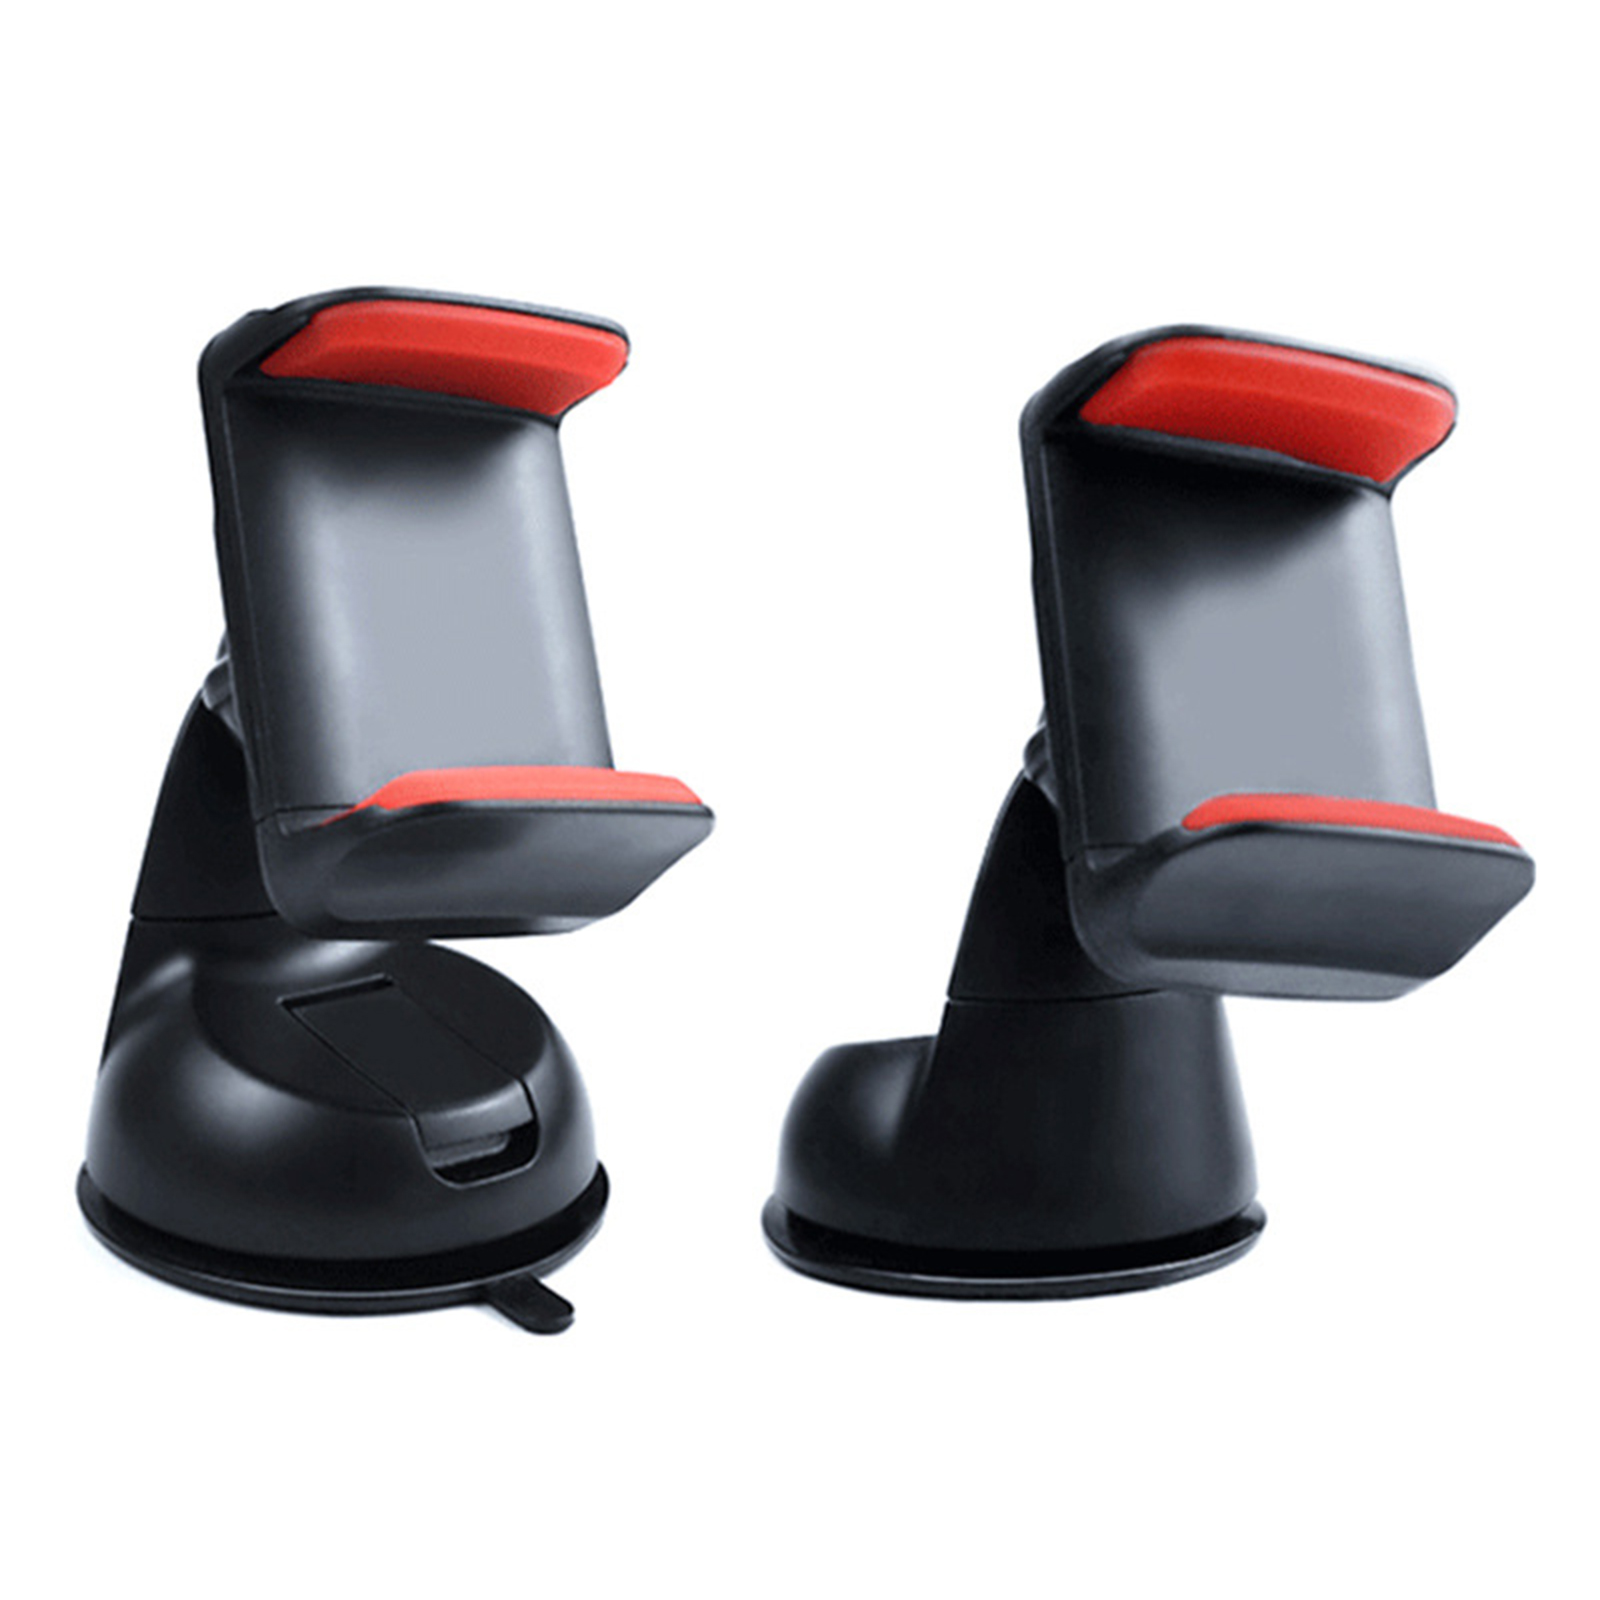 Suction Cup Universal Car Phone Holder Silicone for Auto Air Vent Smartphone suction cup black red